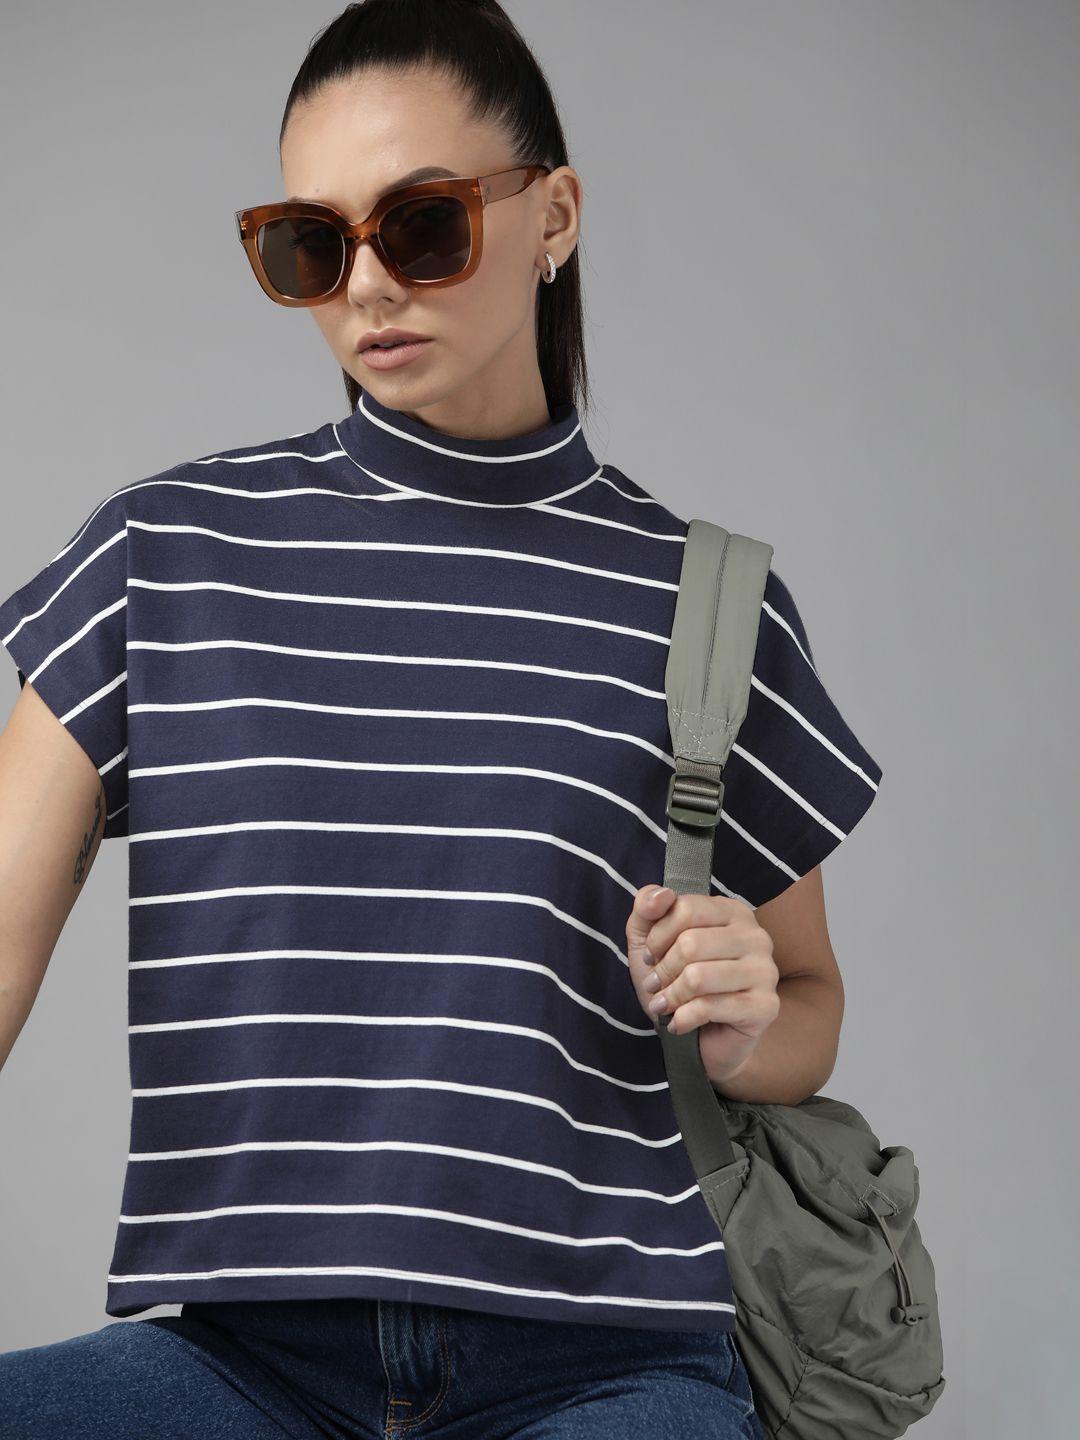 roadster navy blue & white striped top